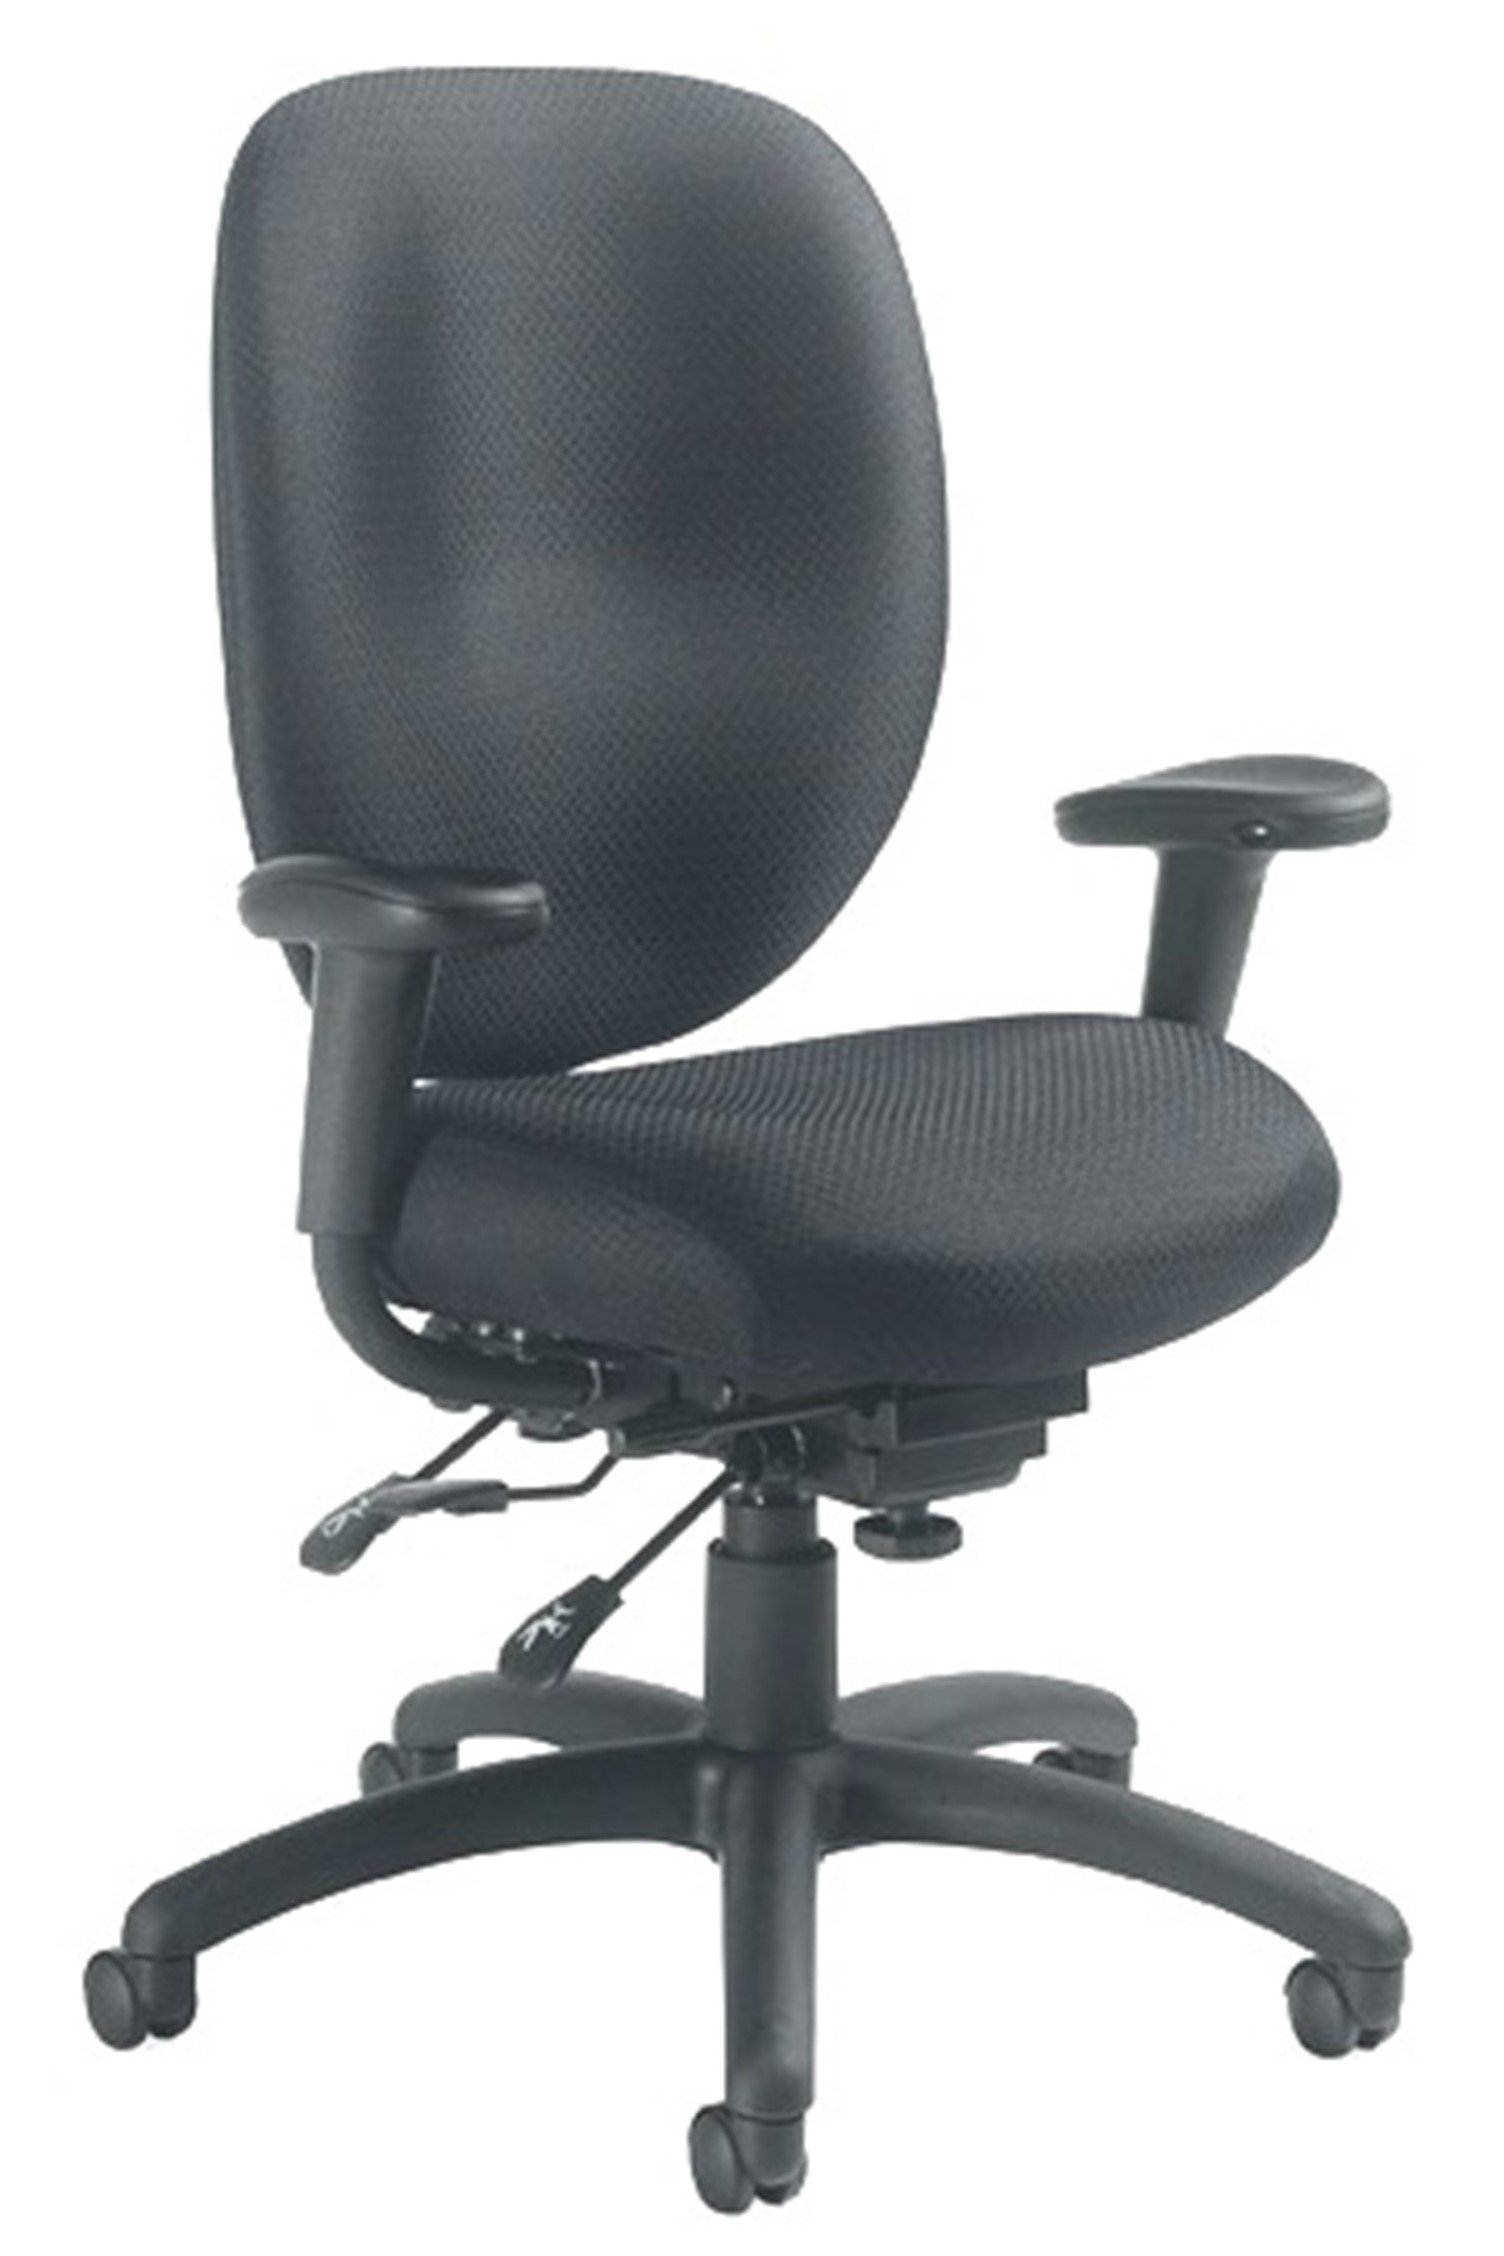 Multi-tilt soft curve task chair in black fabric with tilt tension adjustment, height adjustable arms, adjustable back height, and pivoting arm caps.